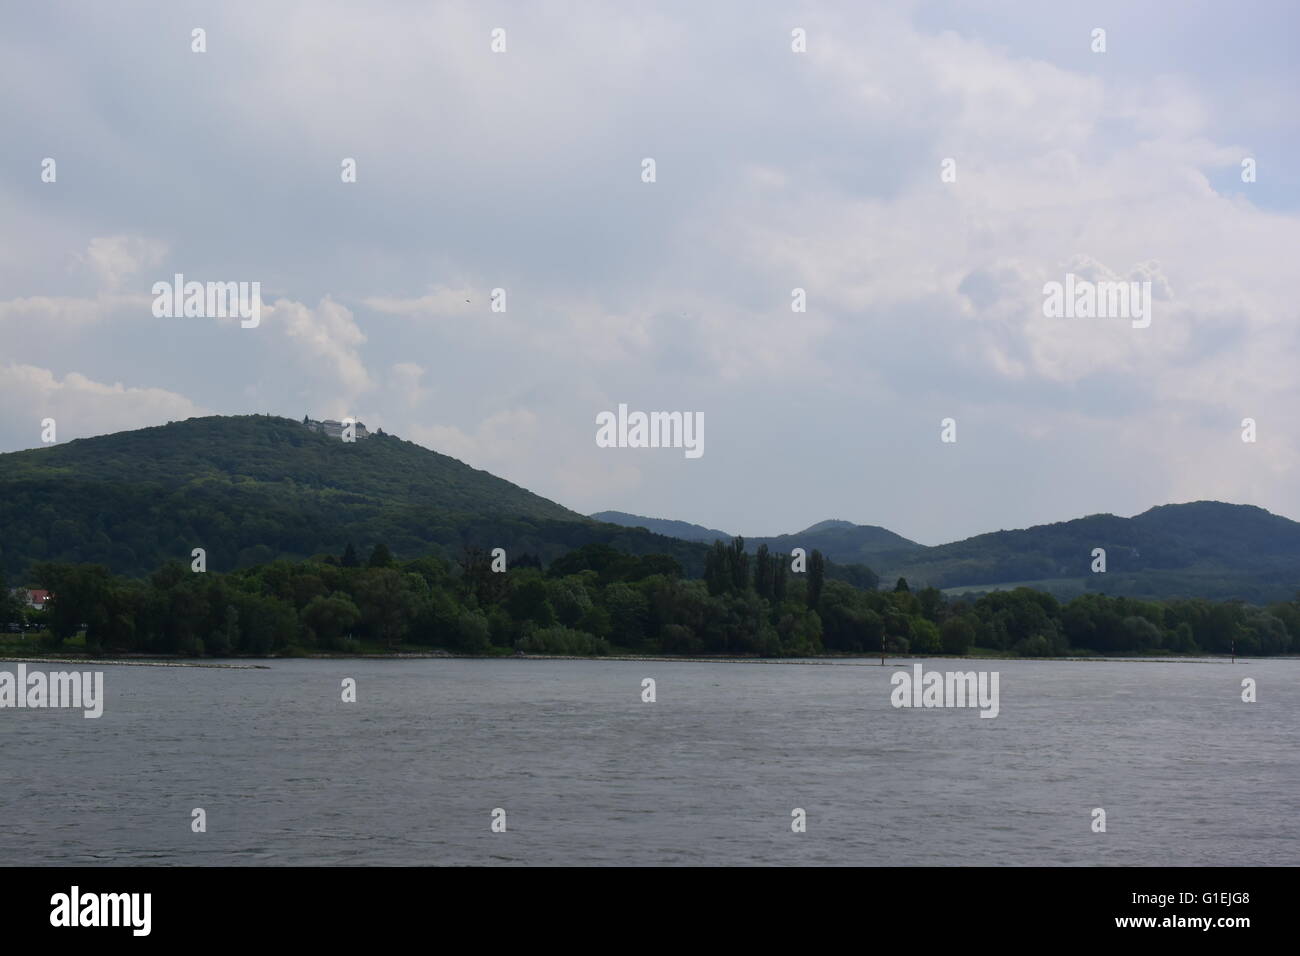 Landscape of the River Rhine country near Bonn, Germany Stock Photo